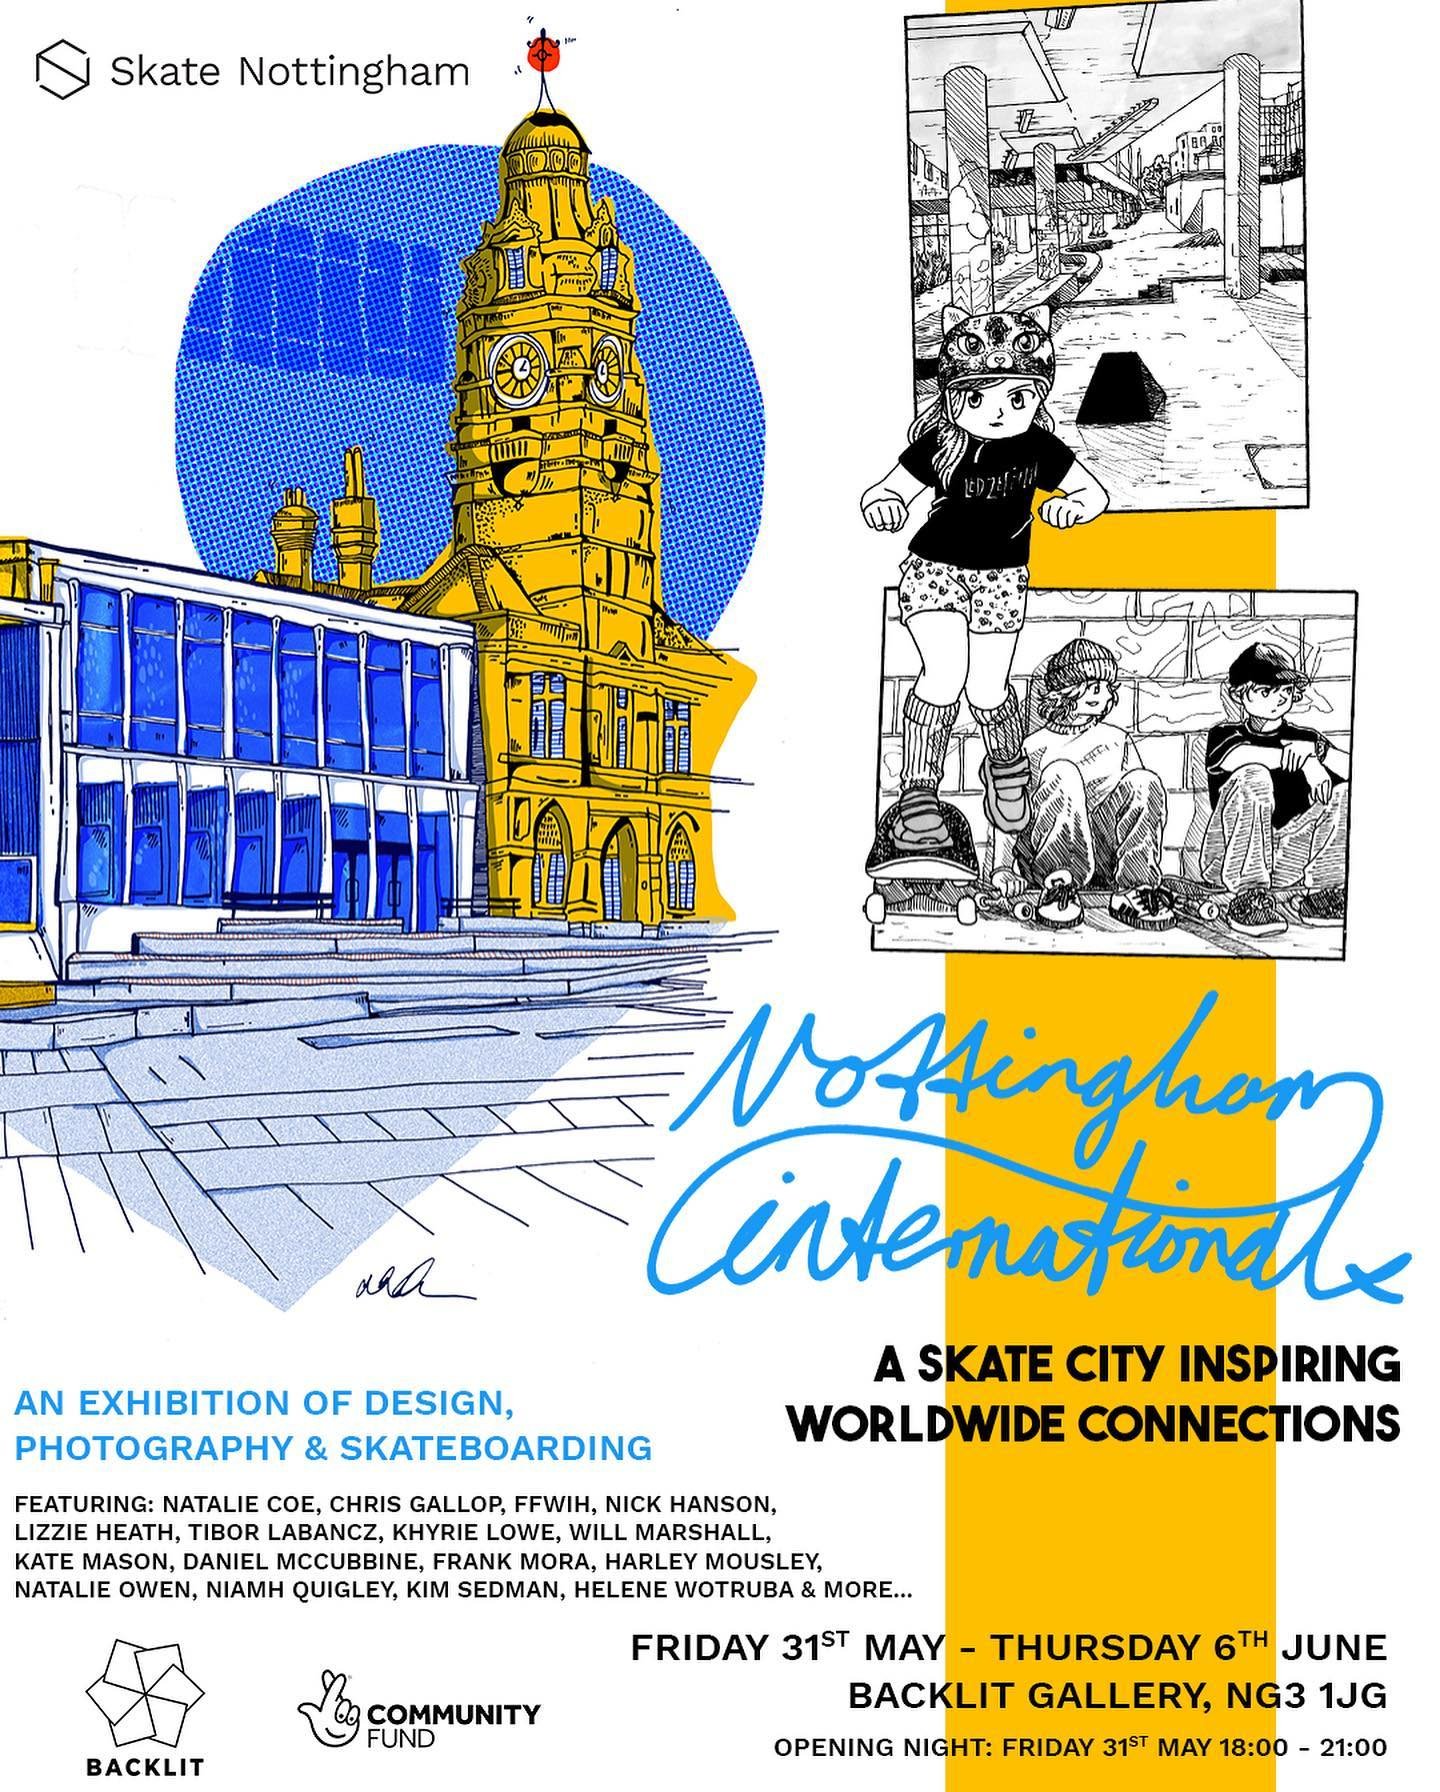 Nottingham, international - our new exhibition at @backlitgallery, opens Friday 31st May, 18:00 - 21:00.⁣
⁣
With this exhibition, we&rsquo;re celebrating Nottingham and pushing its reputation as a &lsquo;skate city&rsquo;, a worldwide destination for